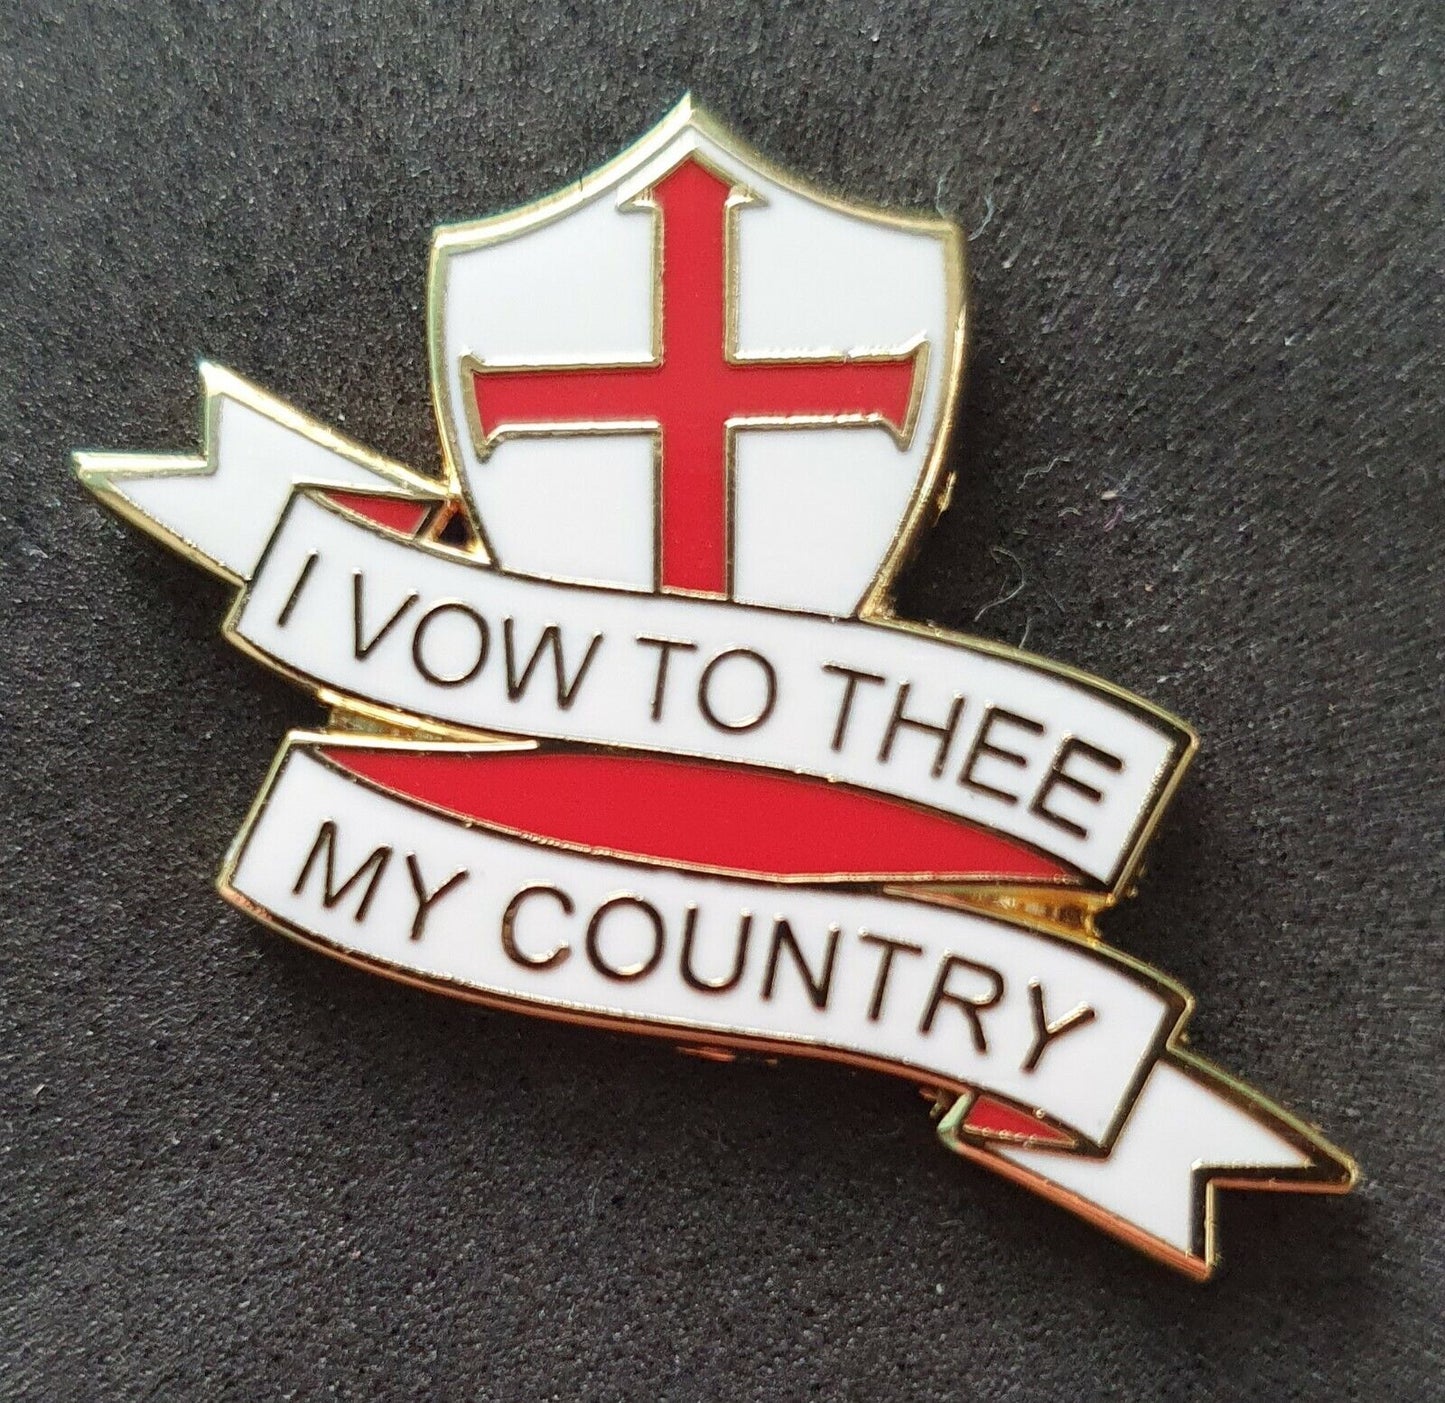 "I Vow To Thee My Country" Badge